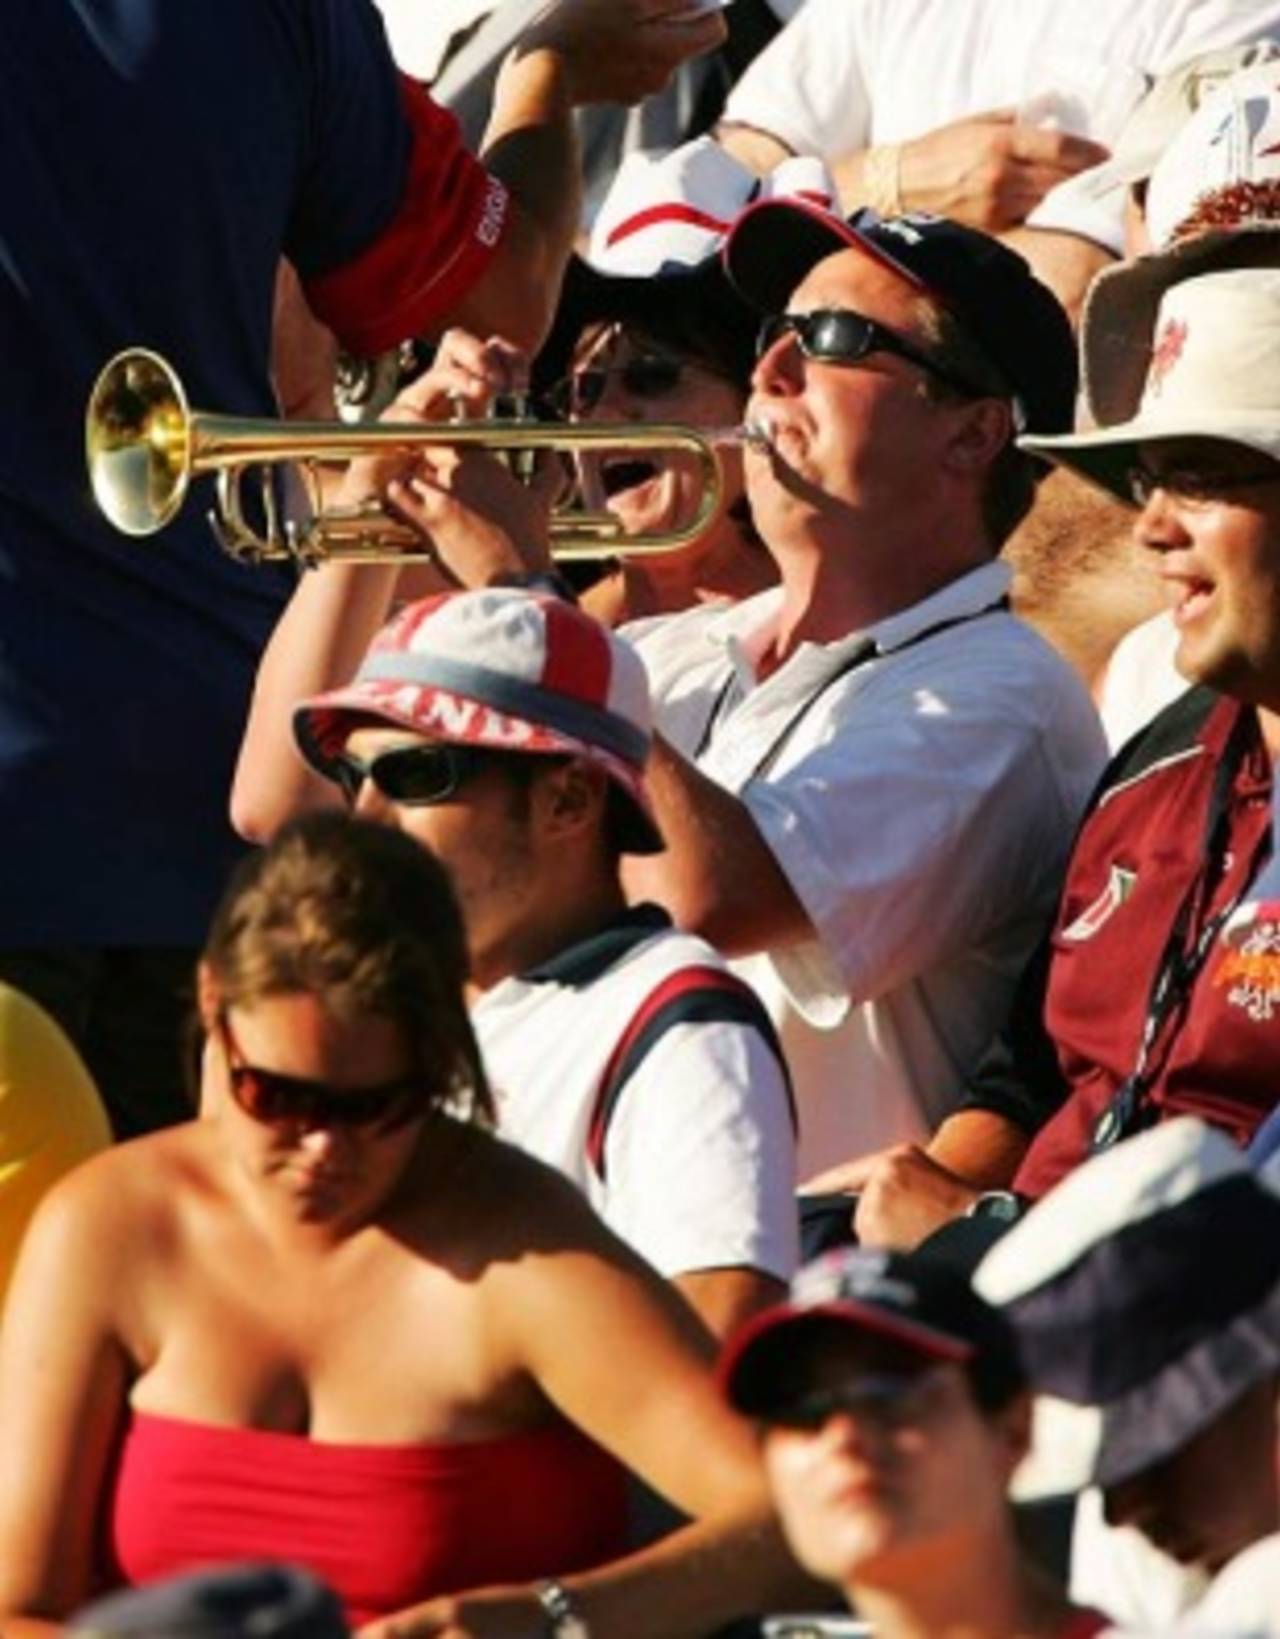 Bill Cooper, the Barmy Army trumpeter, plays a tune in the WACA crowd, Australia v England, 3rd Test, Perth, December 15, 2006